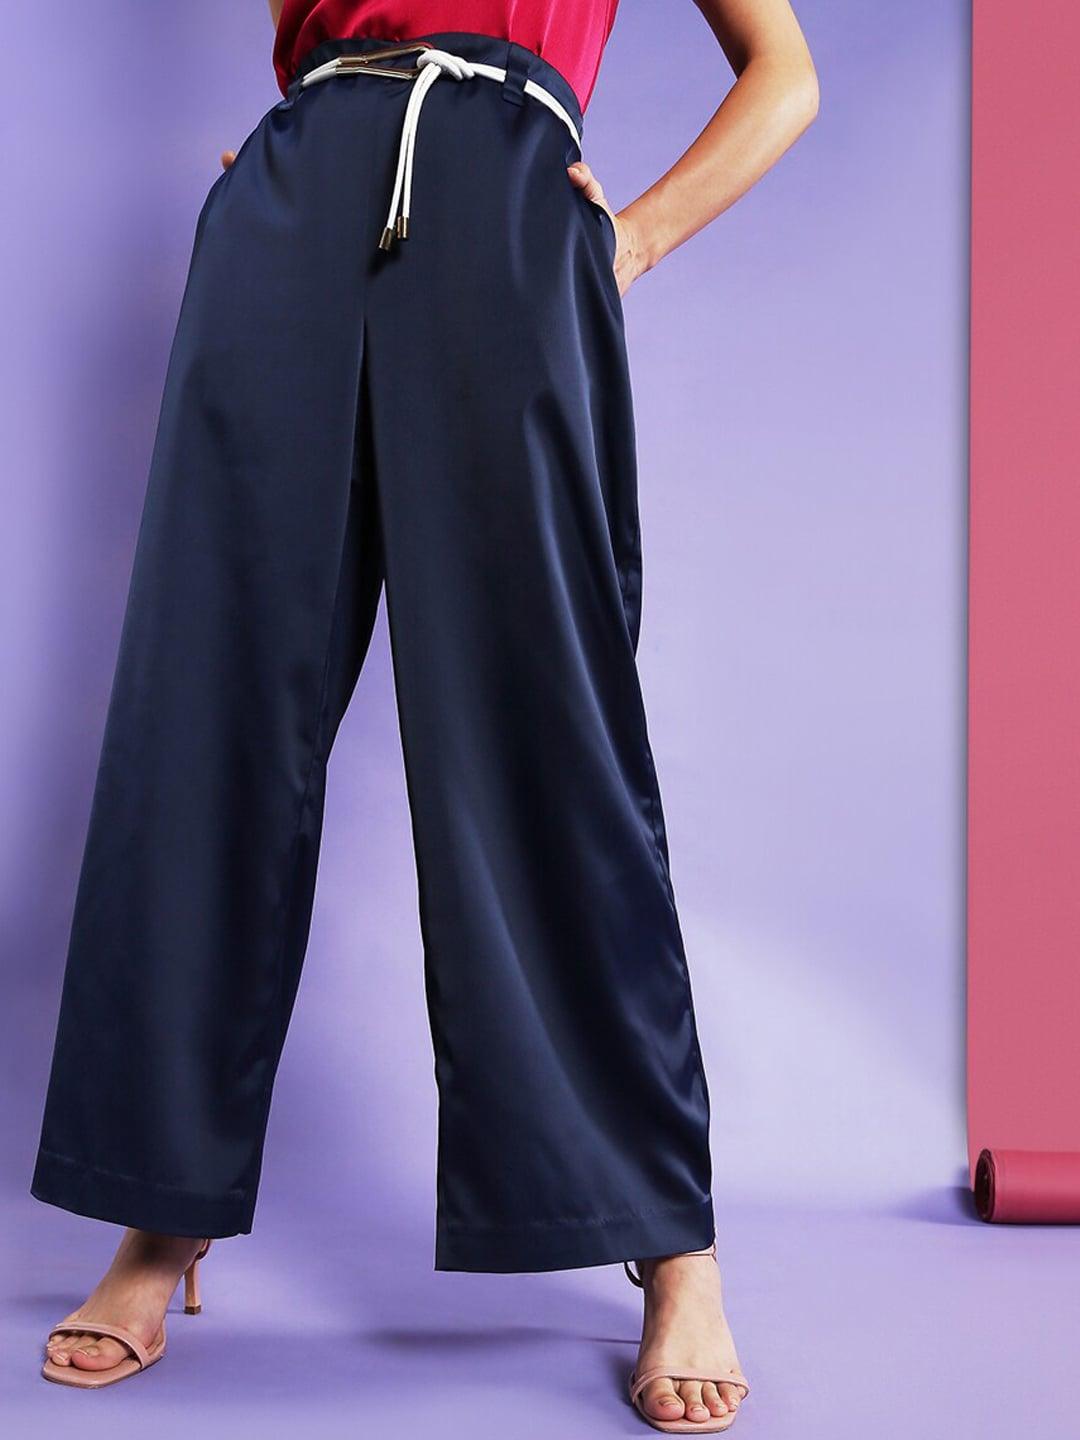 Vero Moda Marquee Collection Women Blue Flared High-Rise Trousers